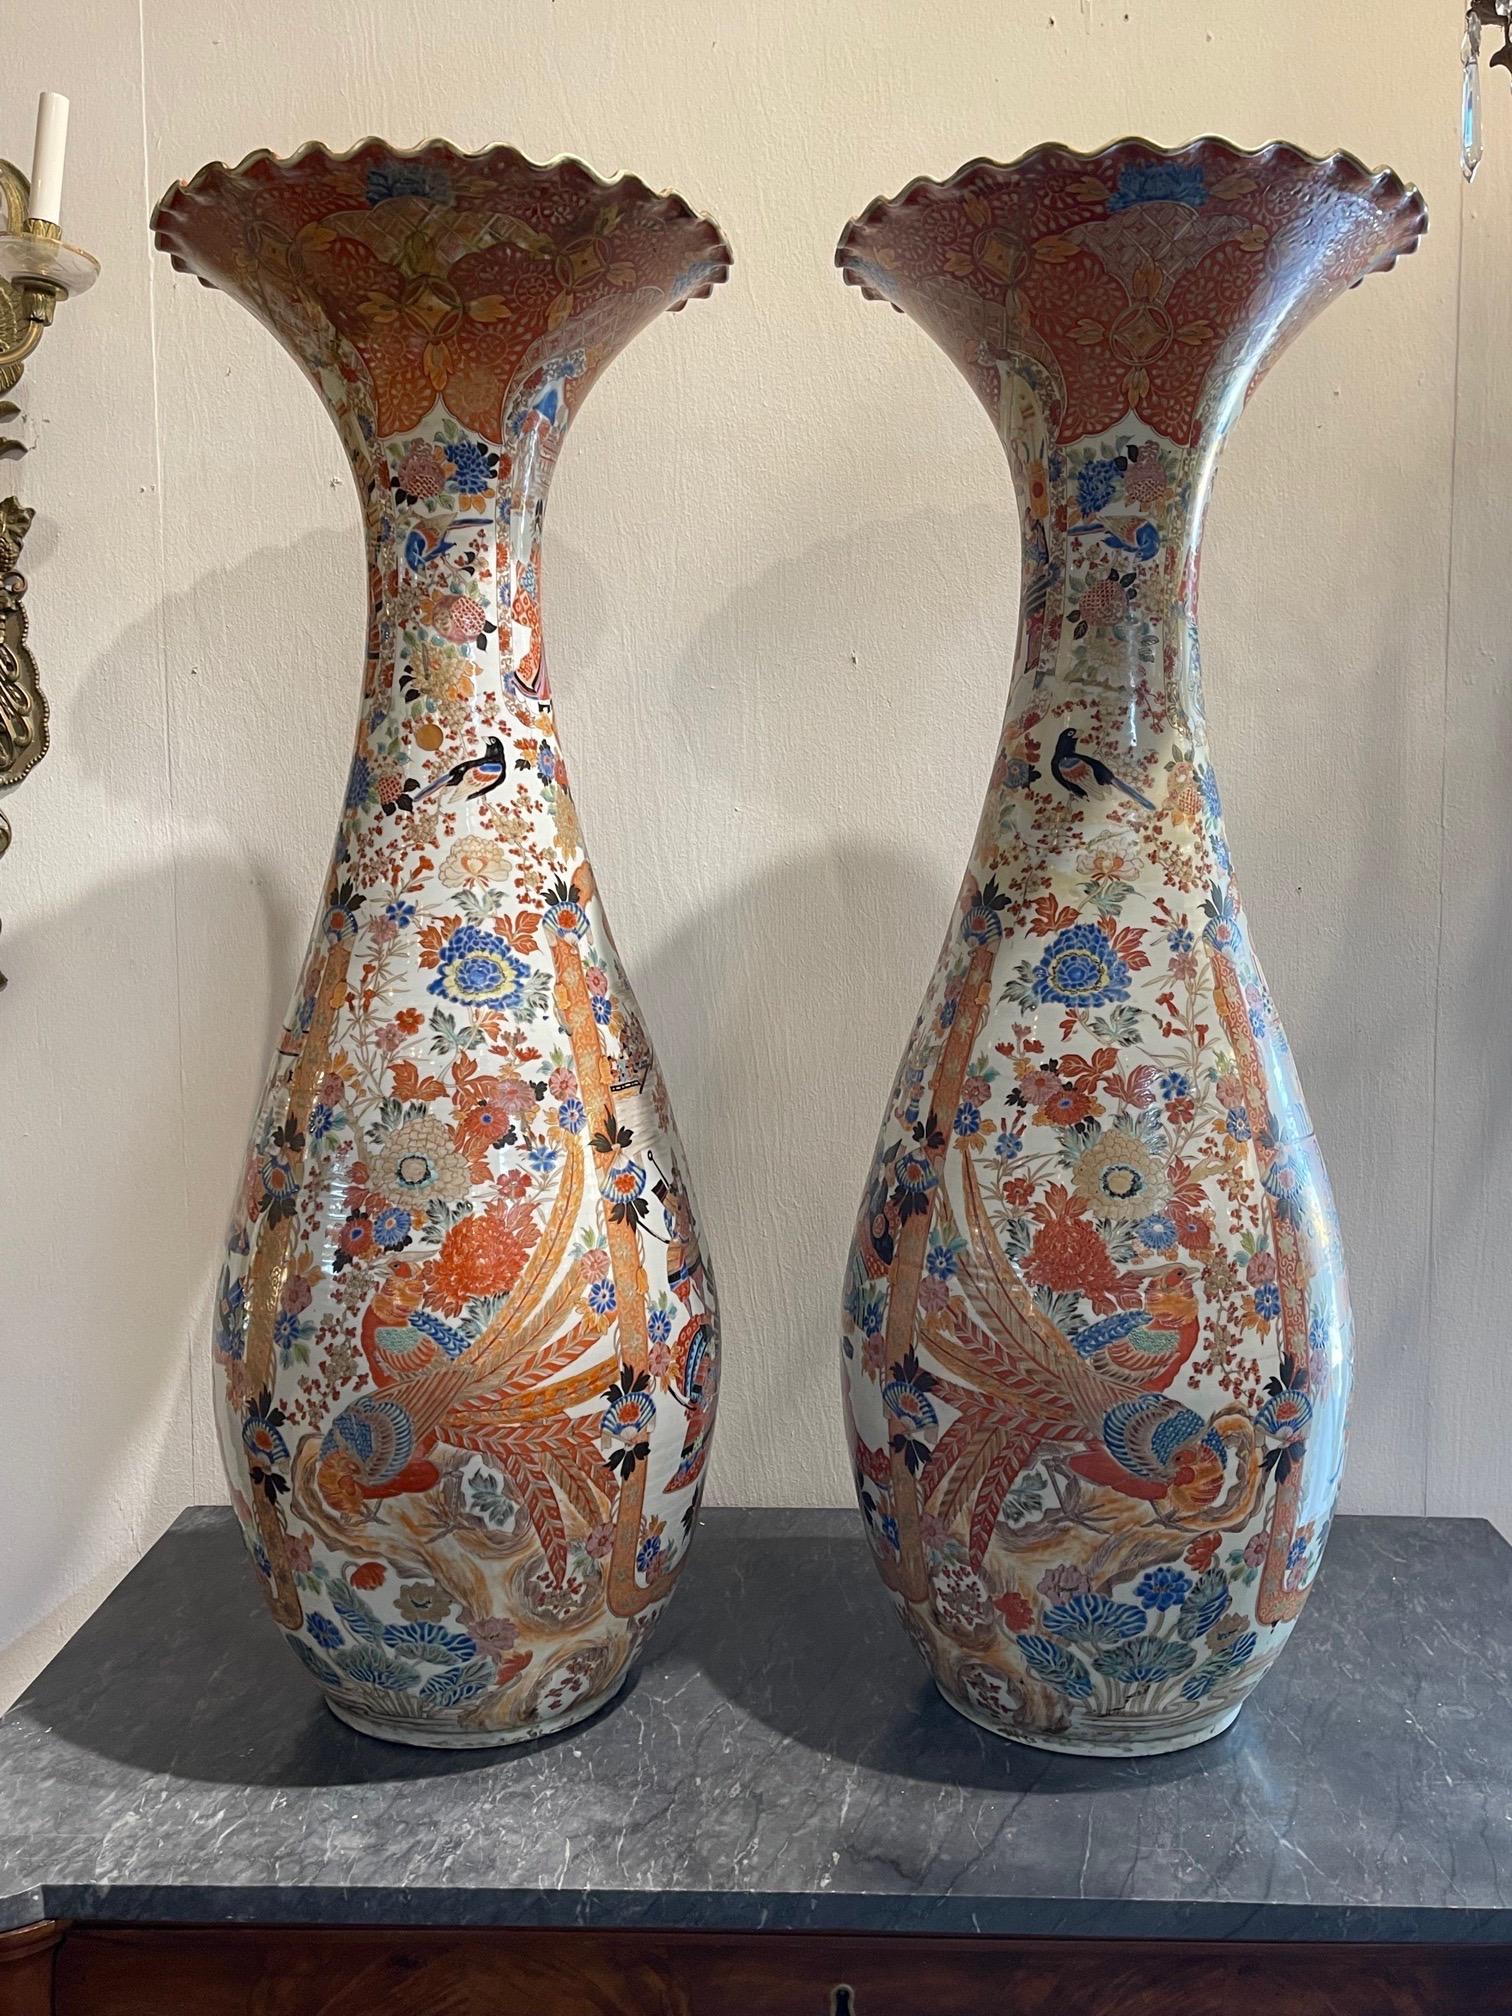 Exceptional large scale pair of palace size Japanese Imari vases. Beautiful colors featuring floral and Asian images. Fabulous!!